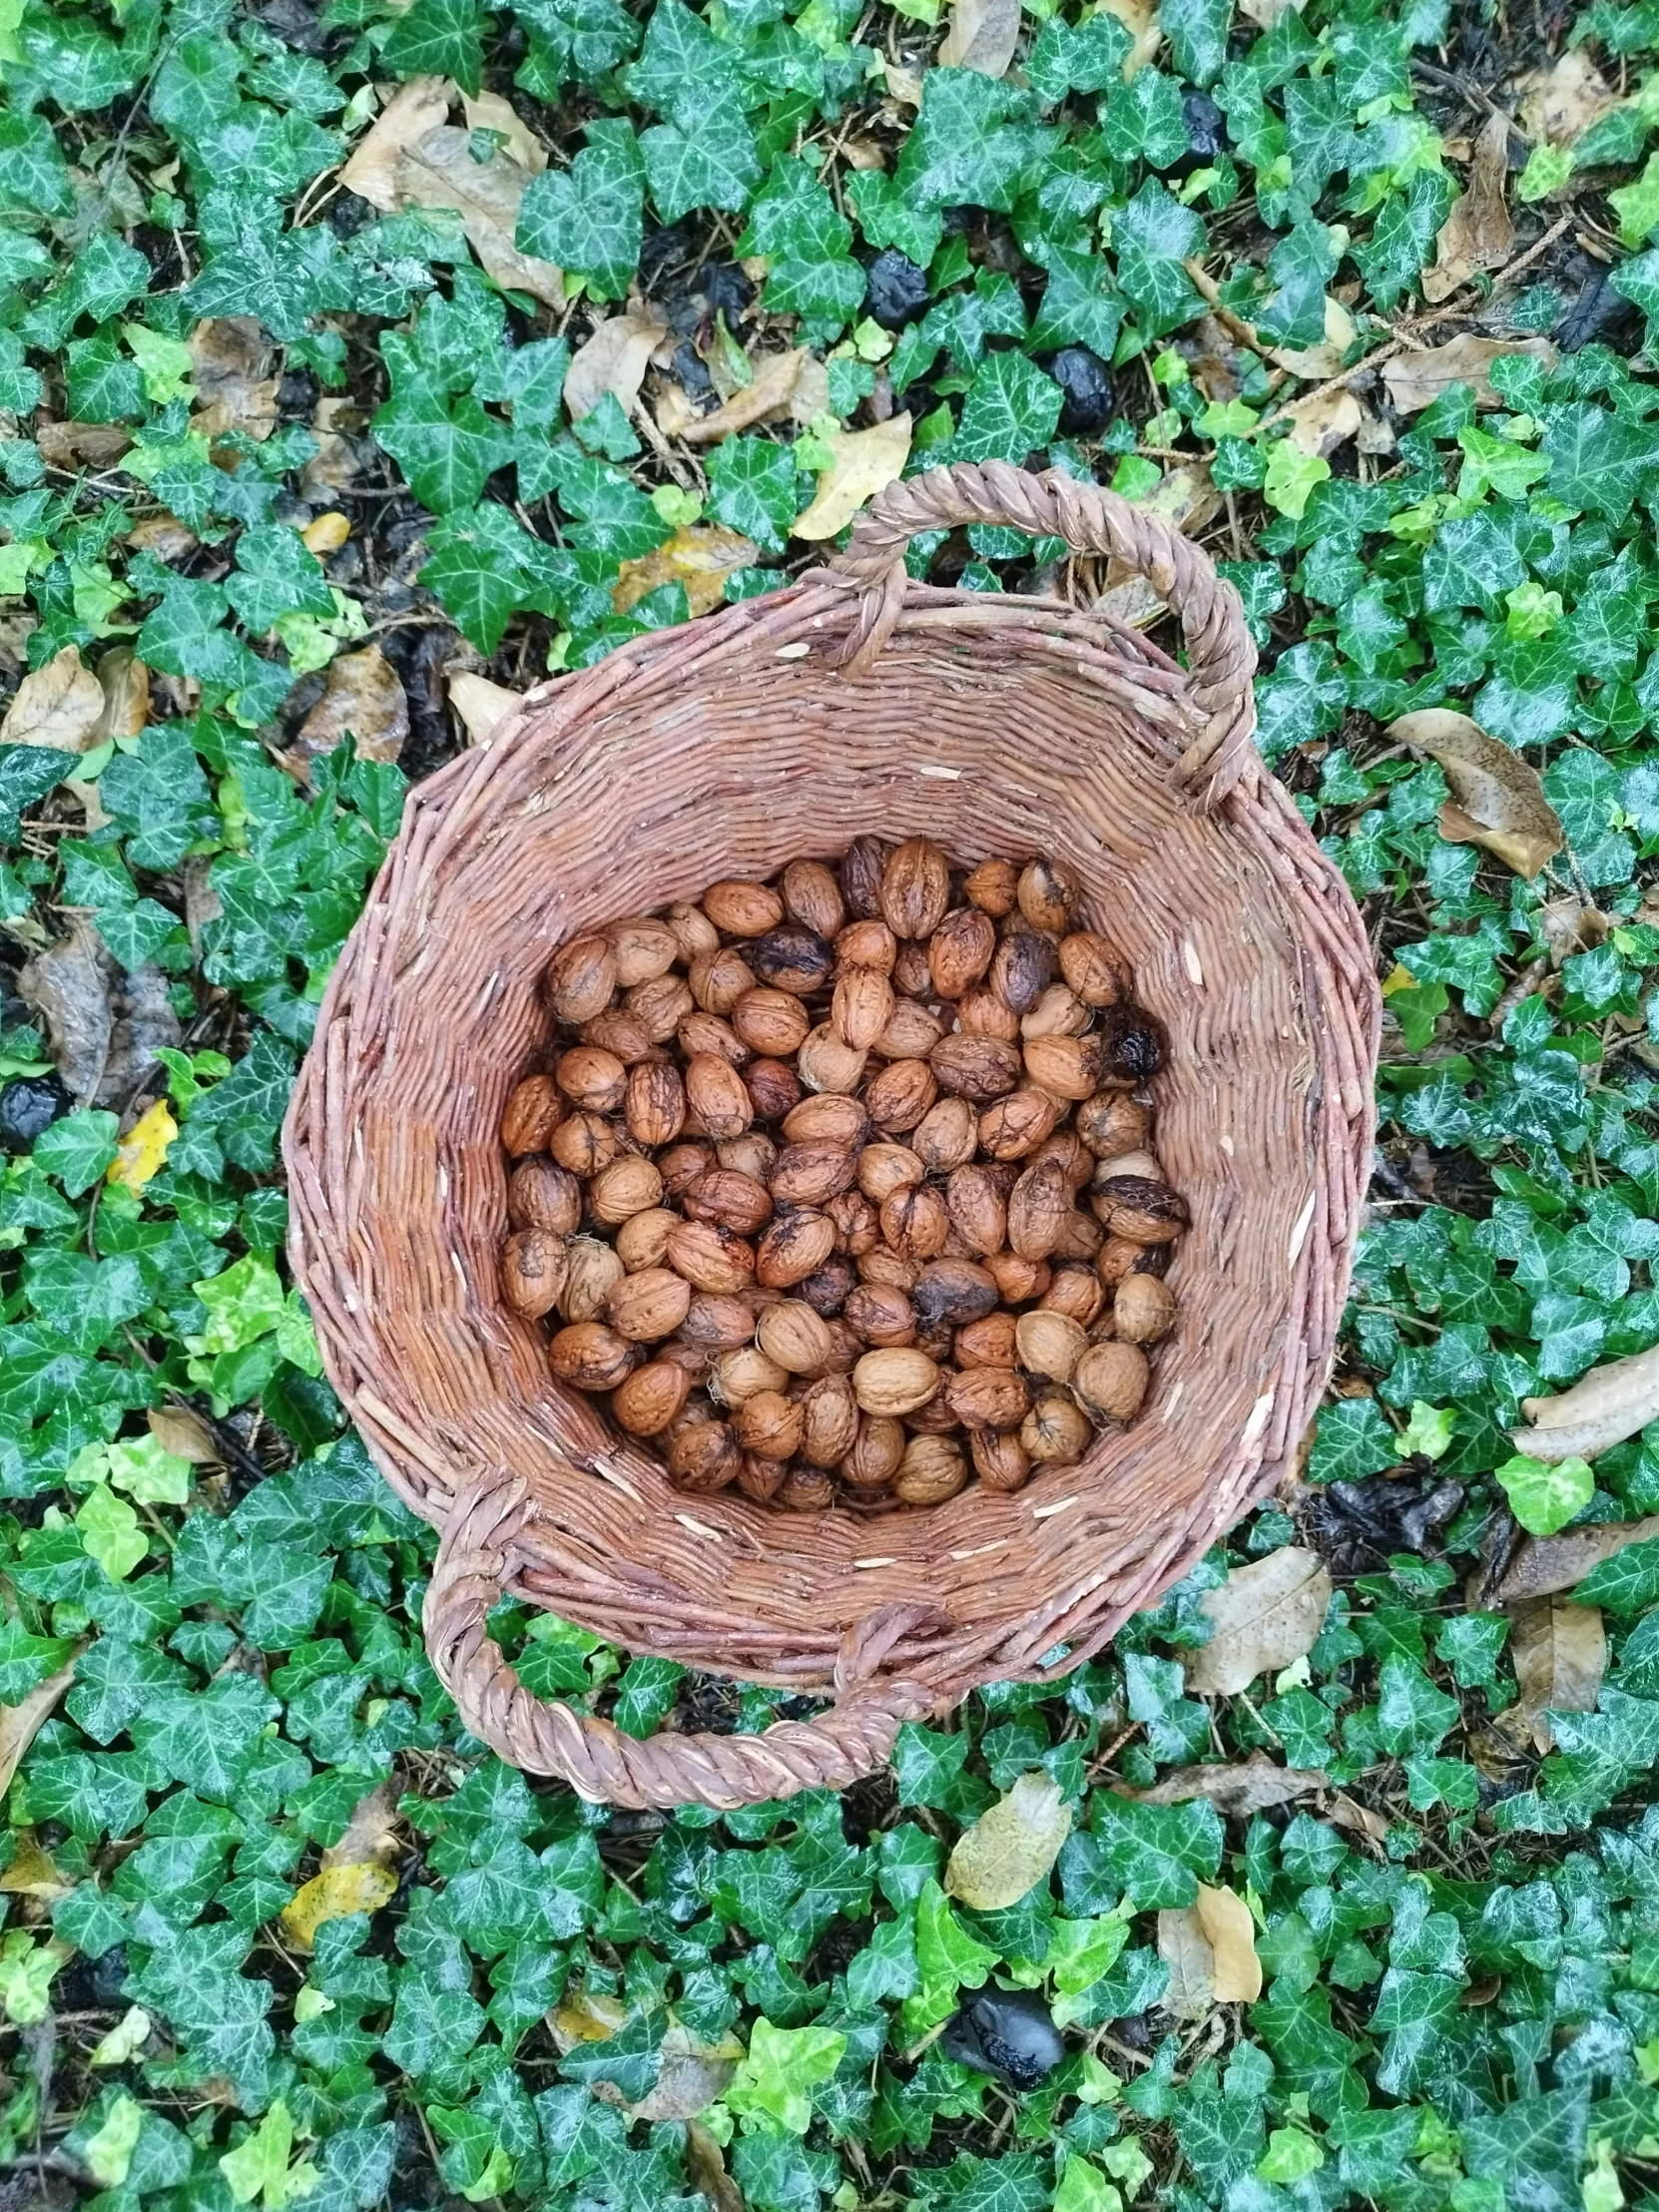 a basket filled with nuts in a bed of green leafy leaves